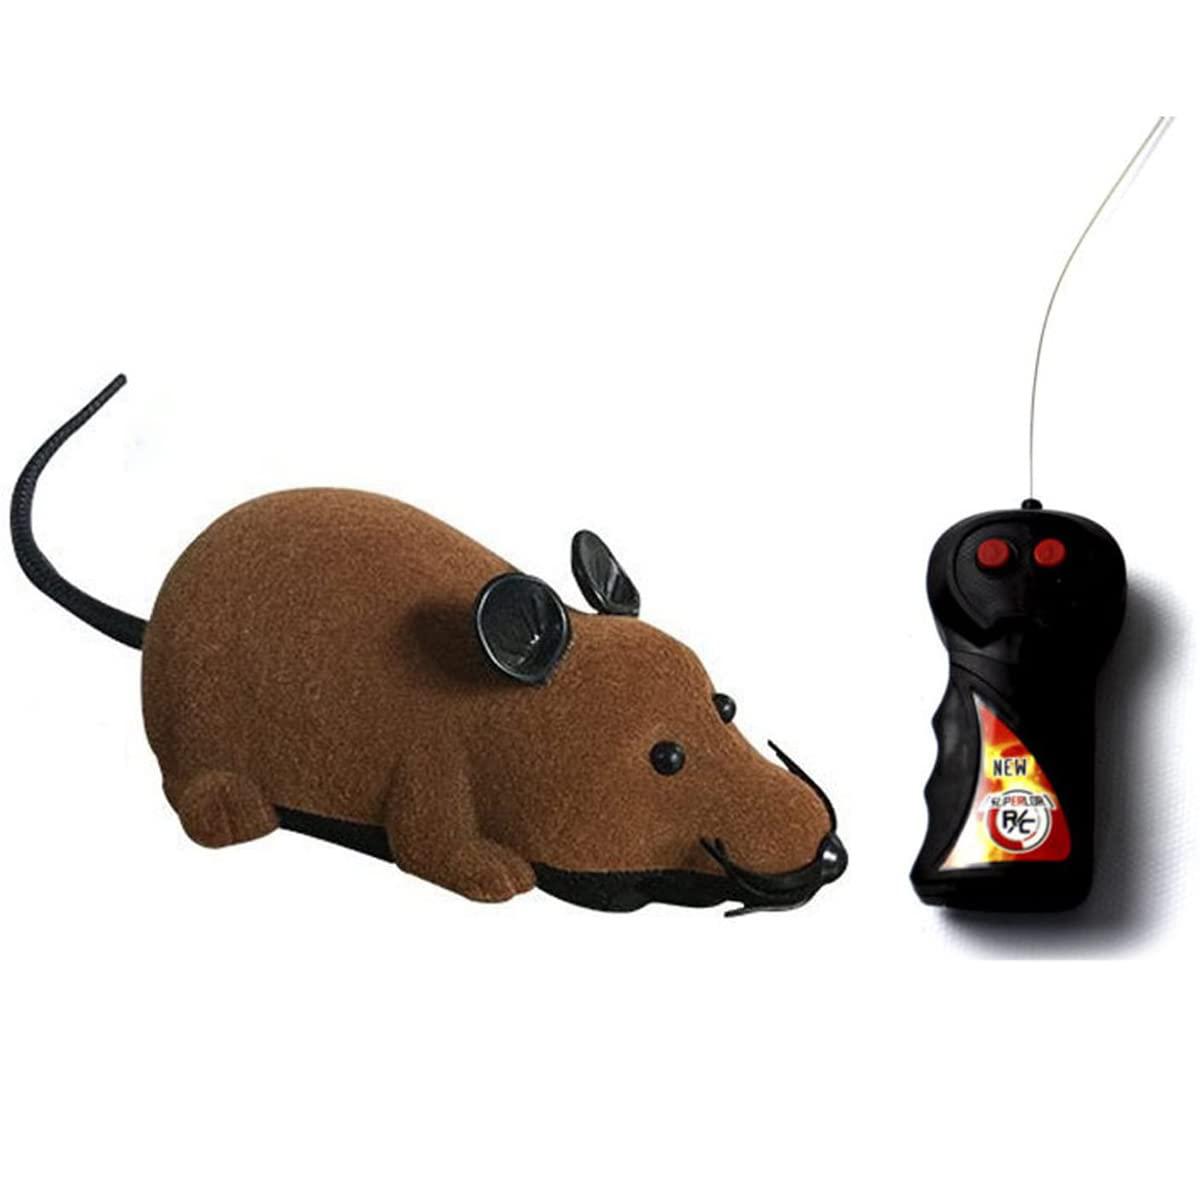 greatstar remote control rat toy, wireless electronic mouse, one best gift for your cats dogs pet or kids & children curious 